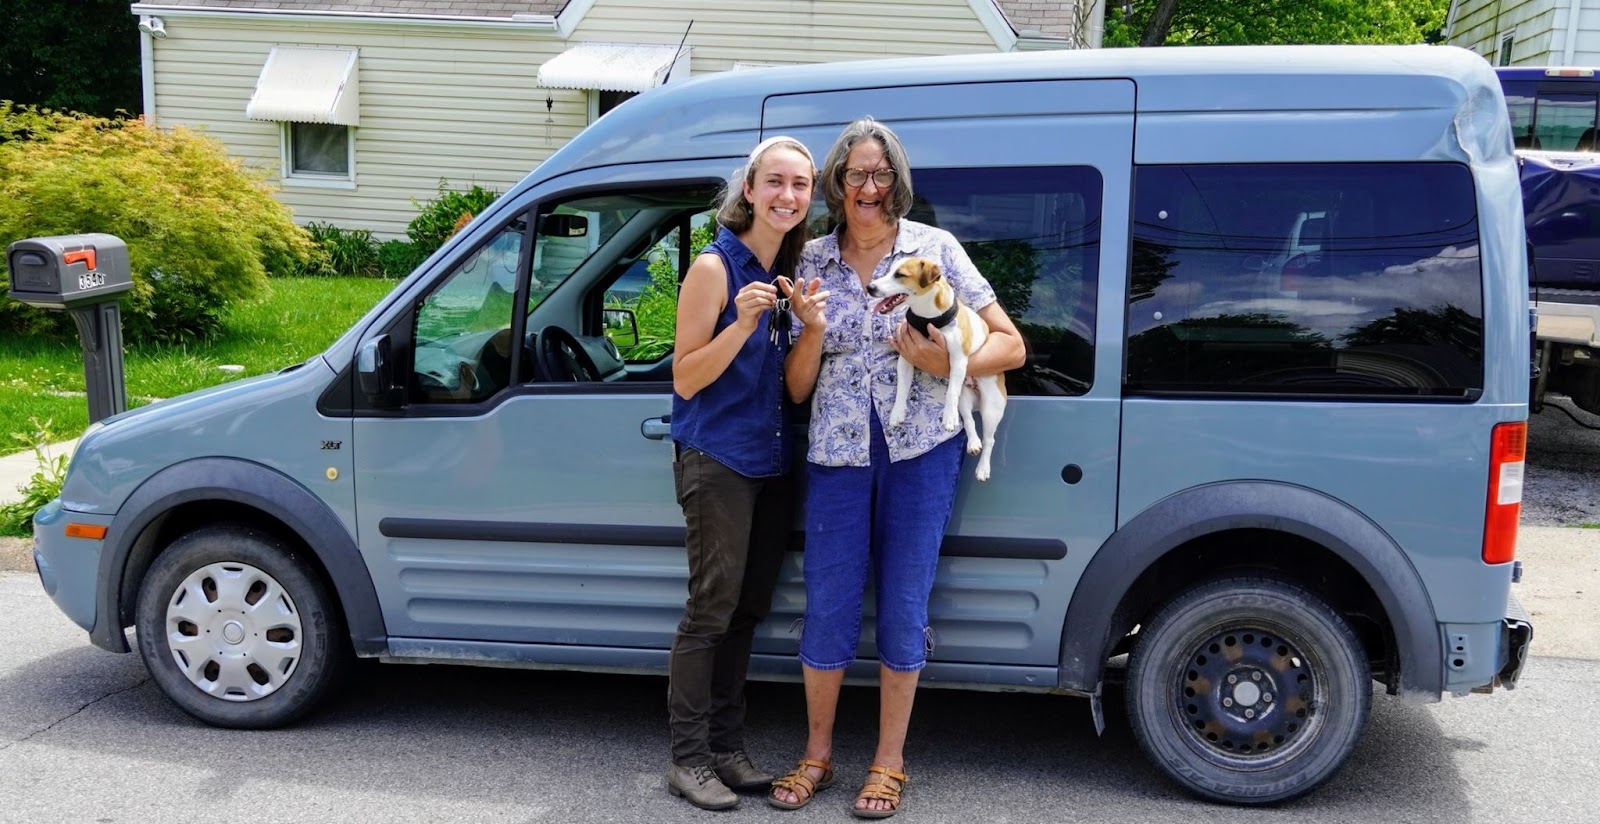 Huemer stands in front of the van next to Mutchler with her dog